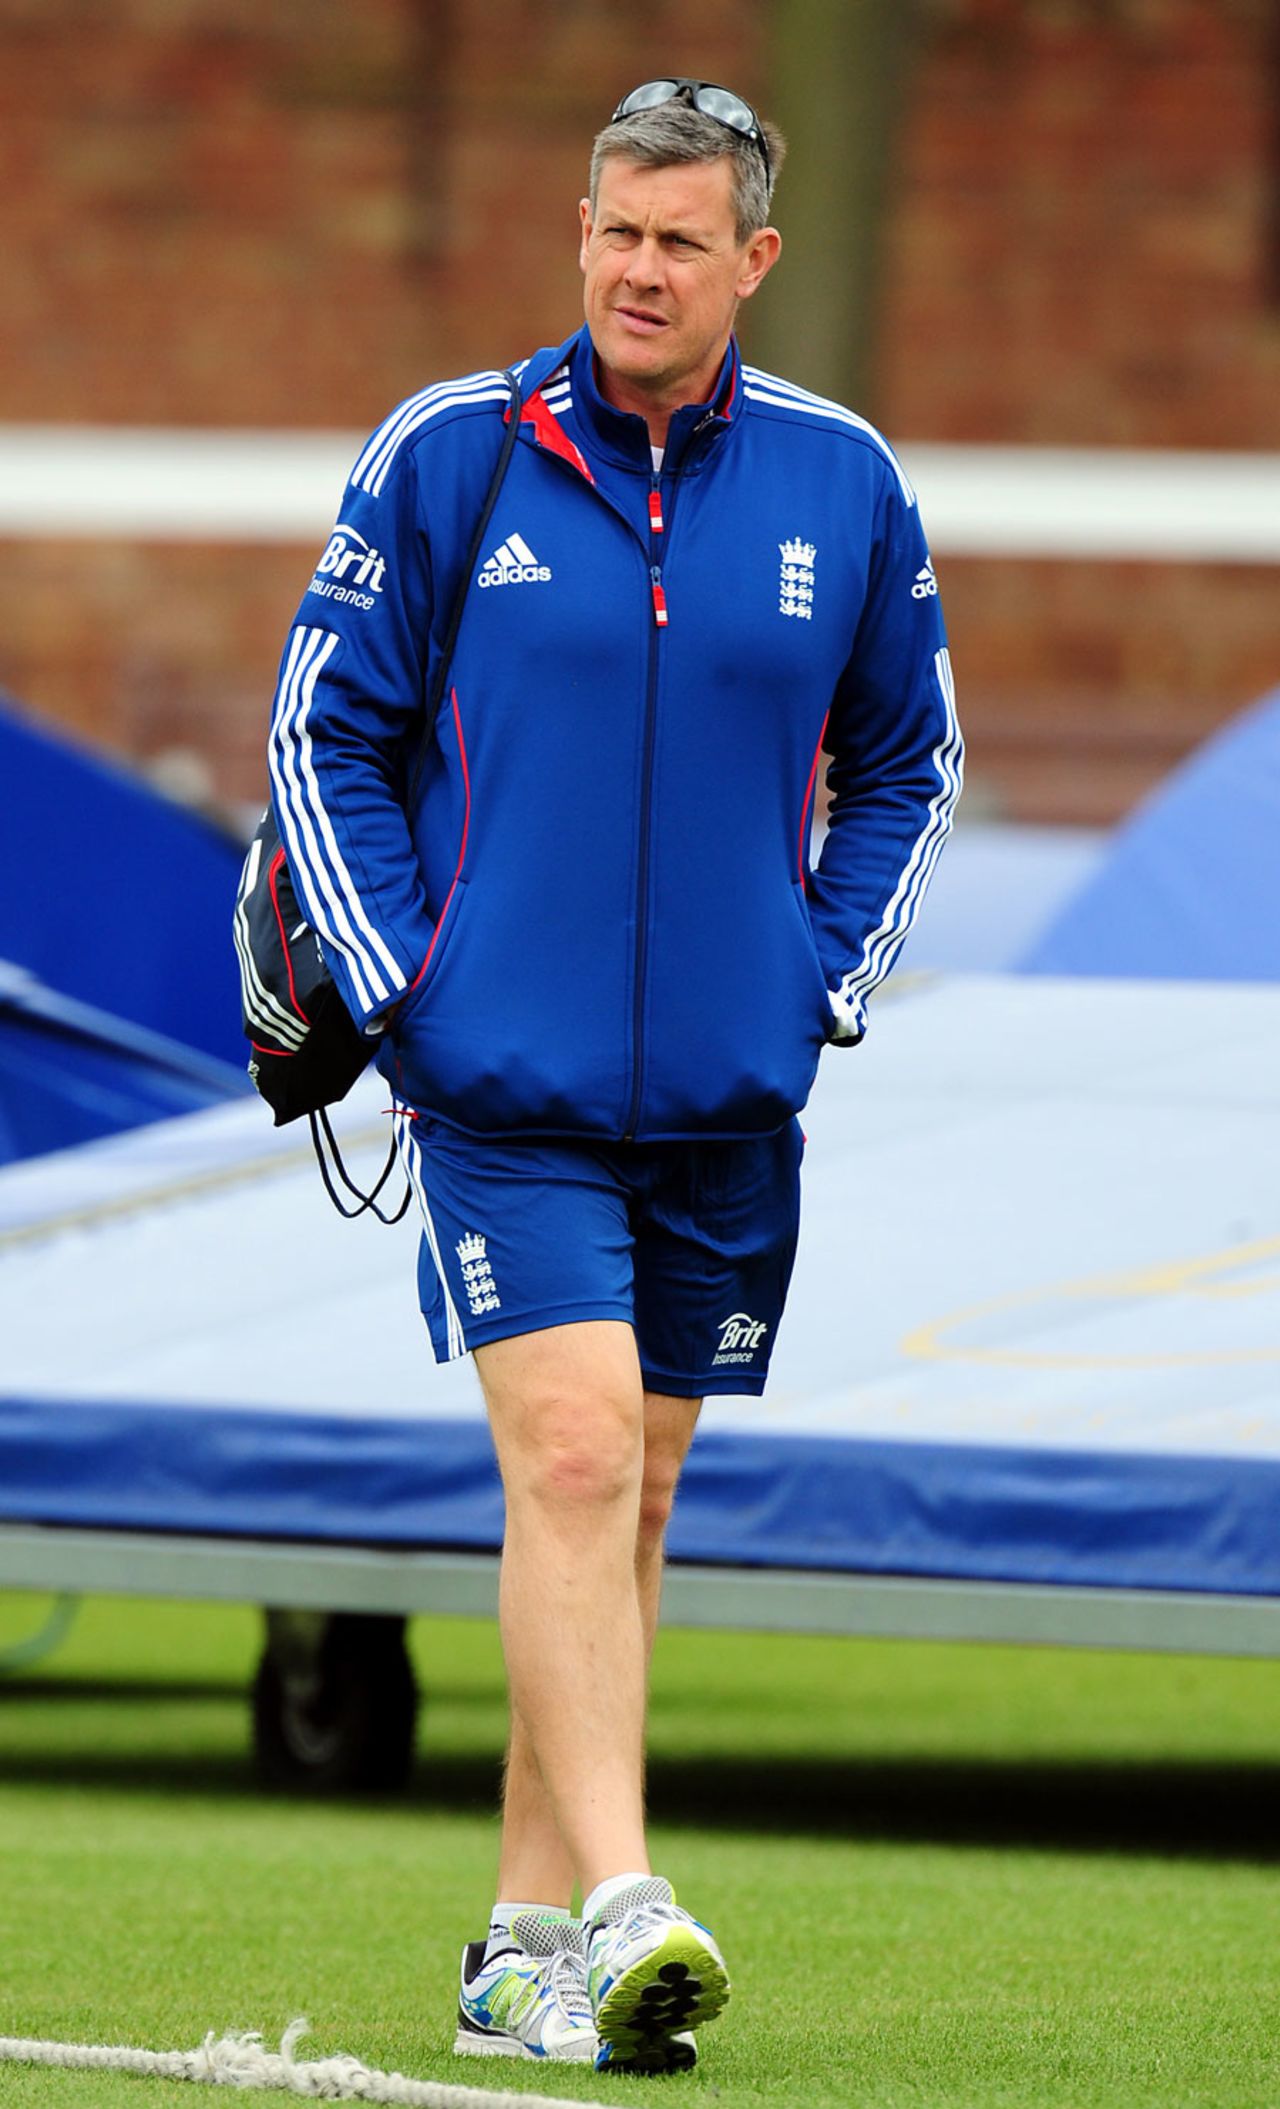 Ashley Giles looks on from the boundary, England Lions v New Zealanders, Tour match, Grace Road, 2nd day, May 10, 2013